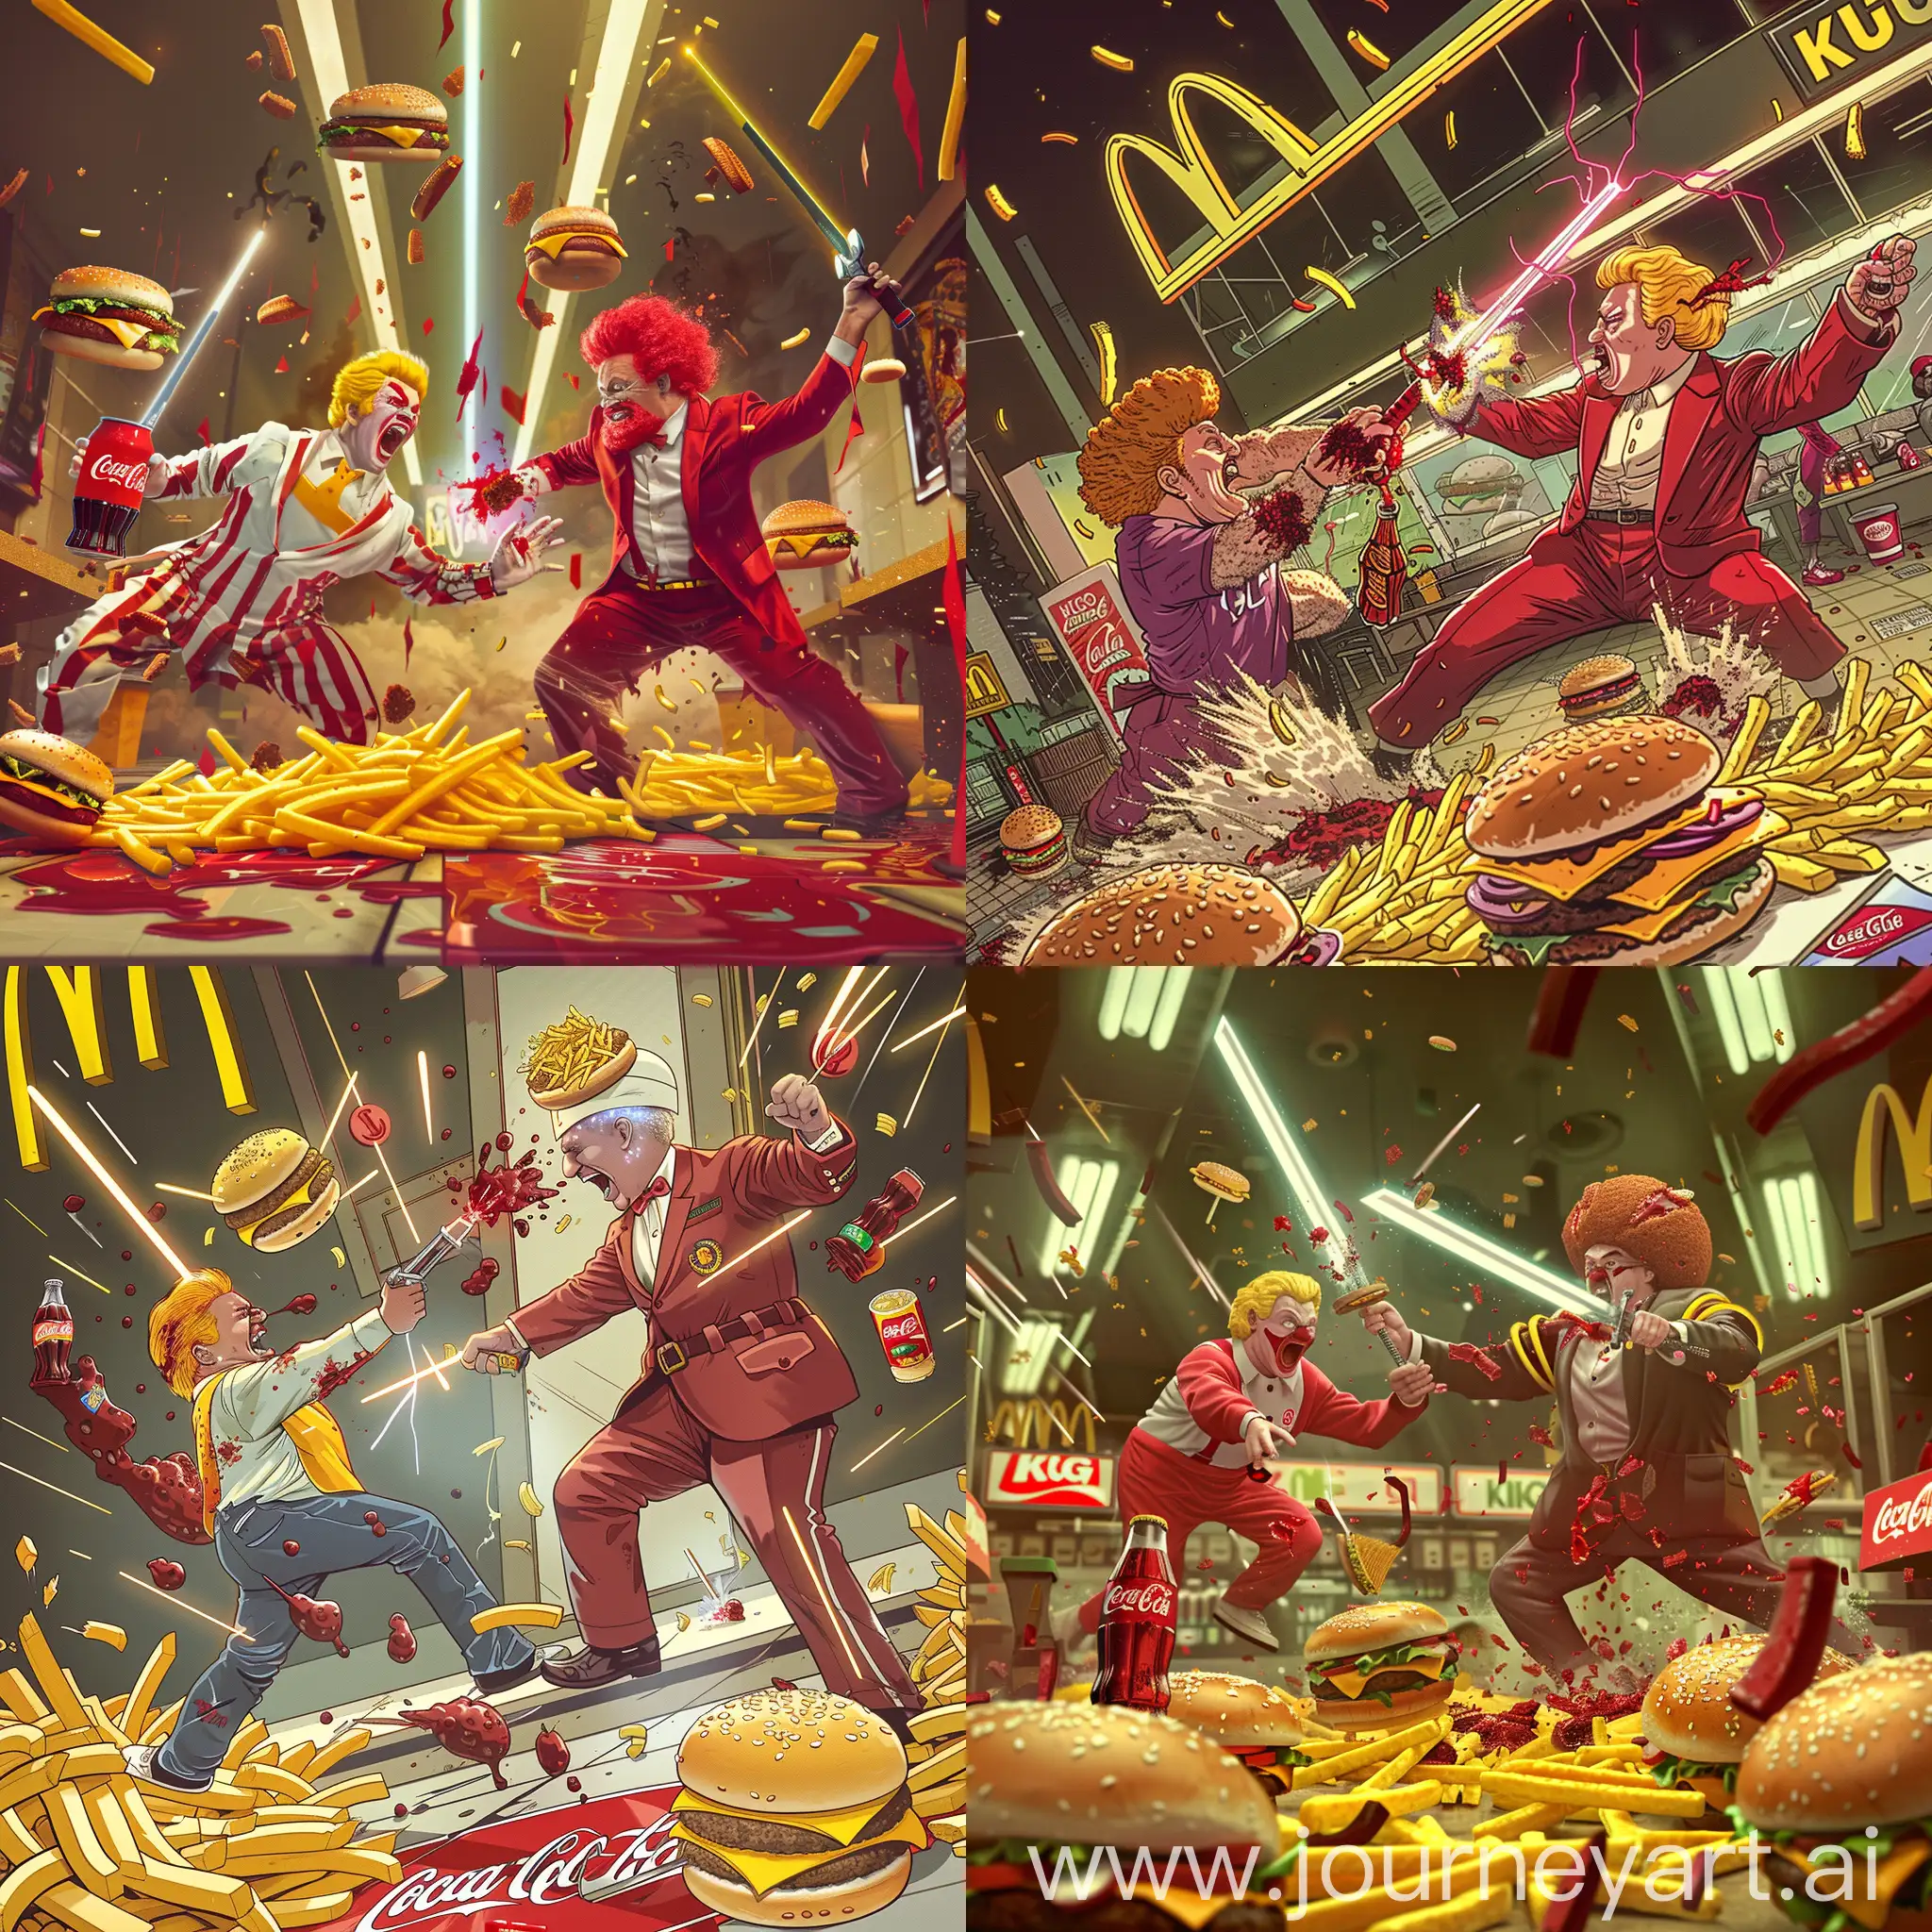 two characters : Ronald McDonald and Colonel sanders are fighting against each other with their laser swords, inside a Burgers King fast-food restaurant,

nobody else, 

many hamburgers, yellow french fries and Coca-Cola get smashed and fall to the ground,